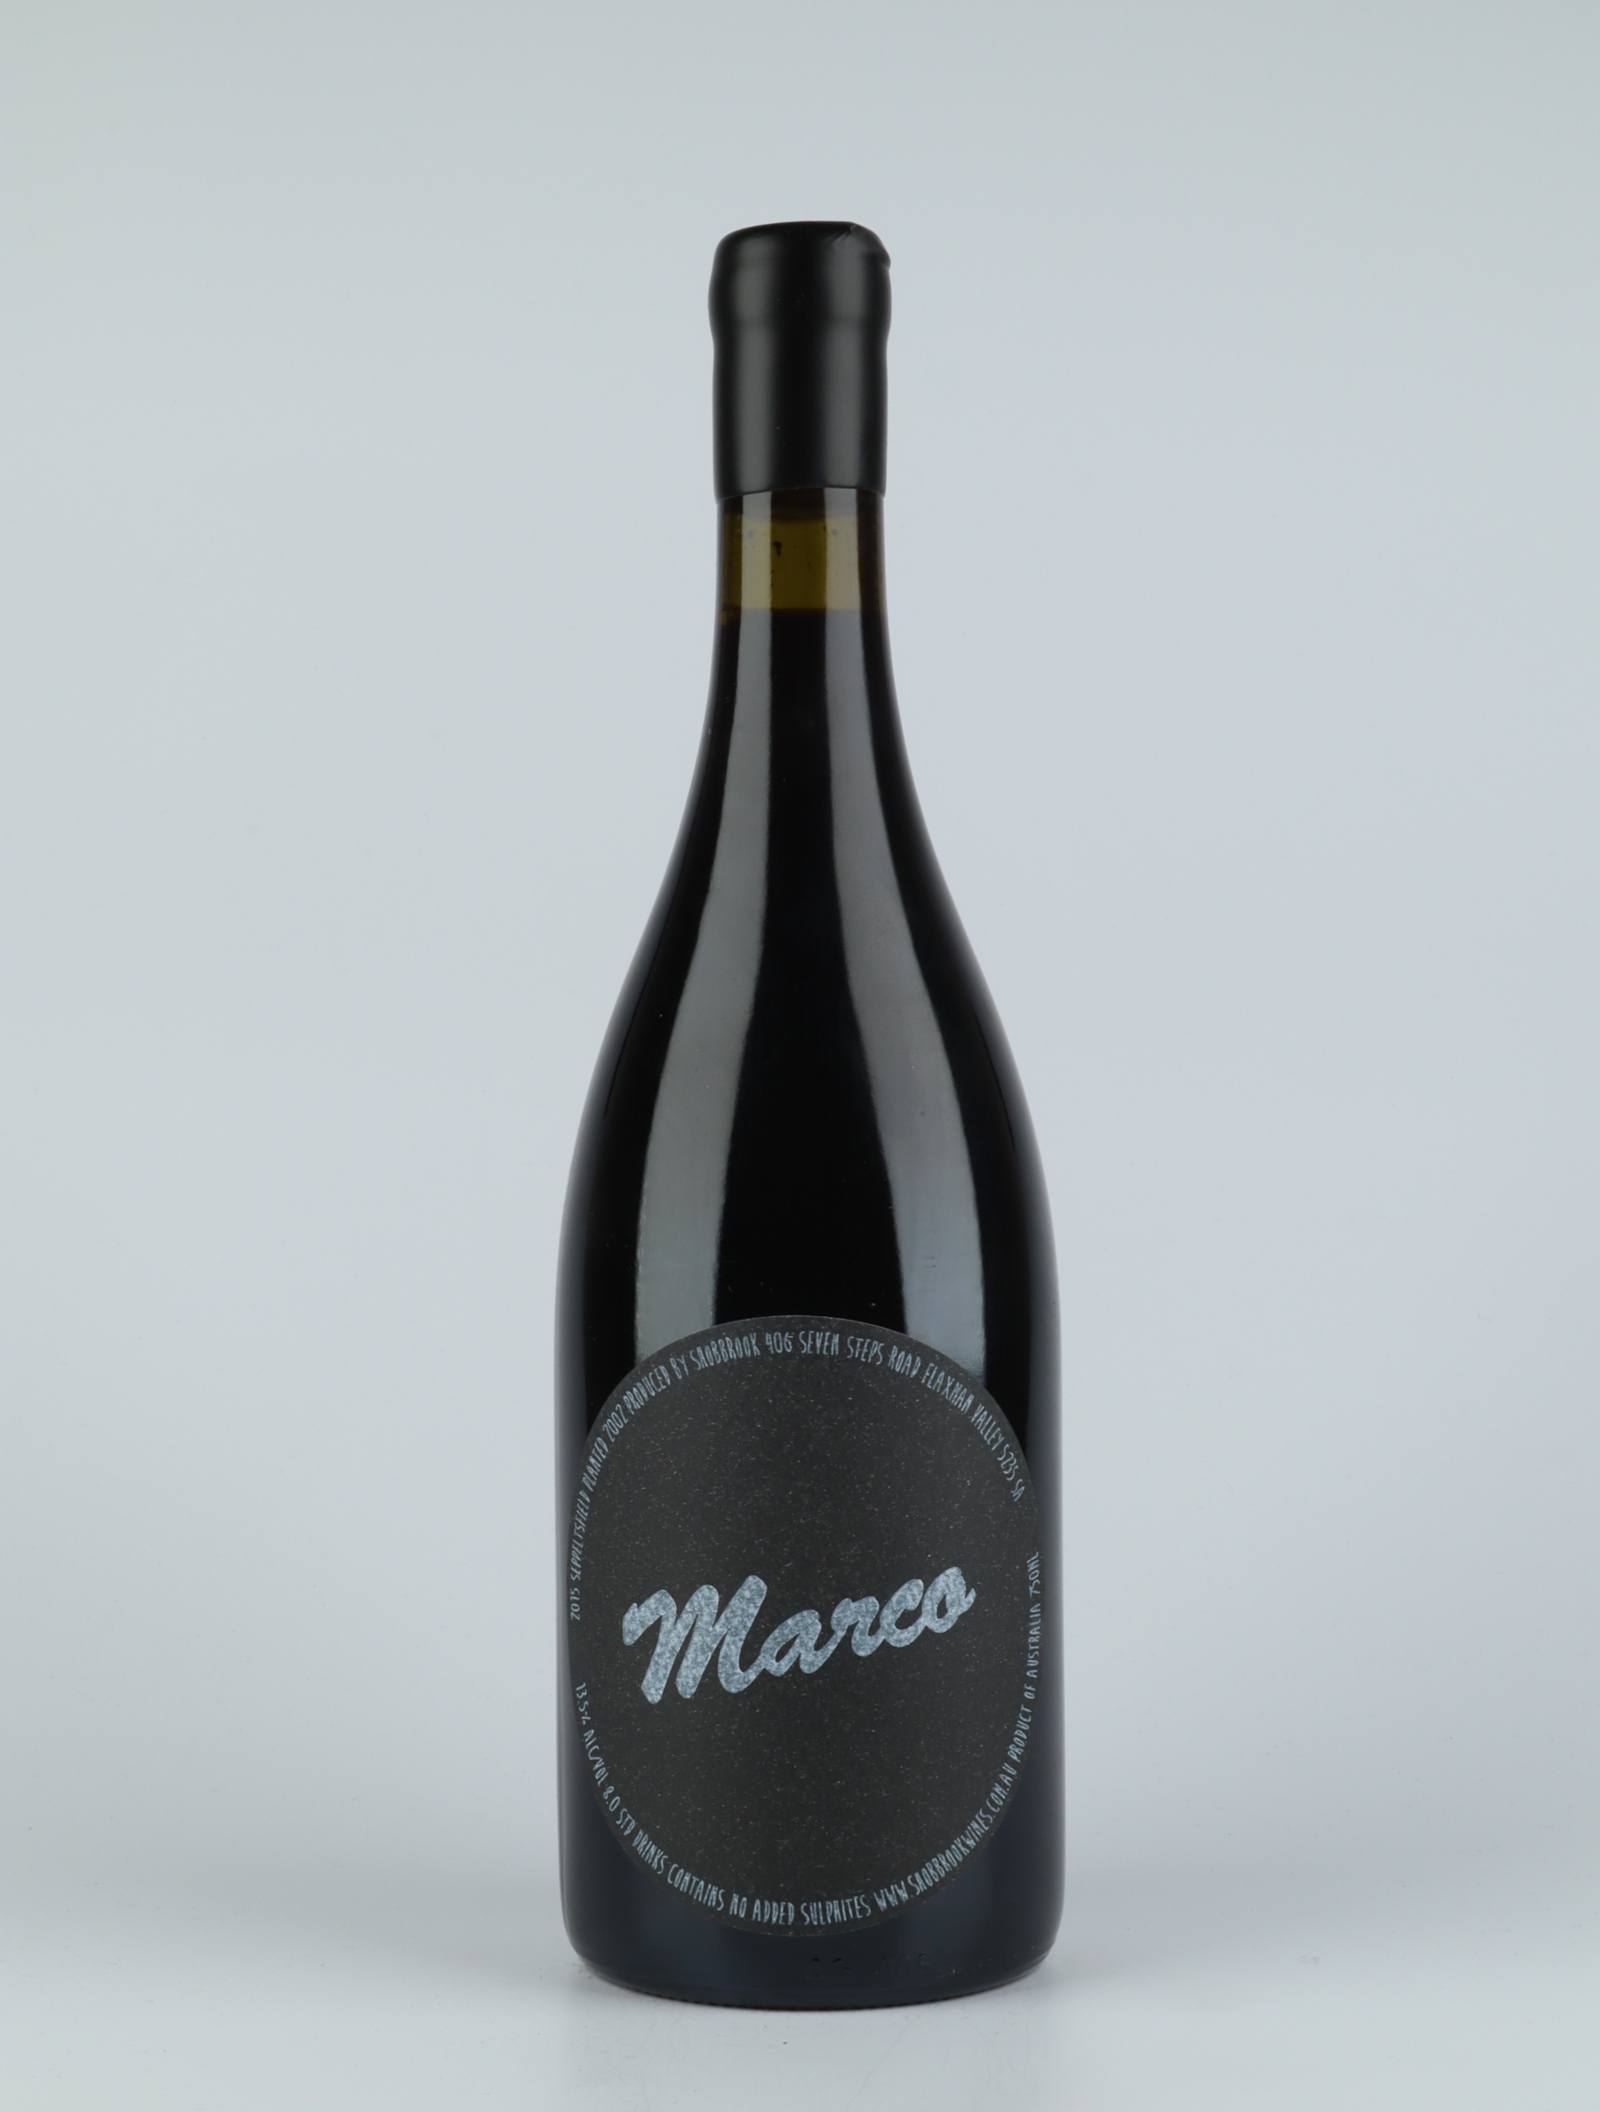 A bottle 2015 Marco Red wine from Tom Shobbrook, Barossa Valley in 